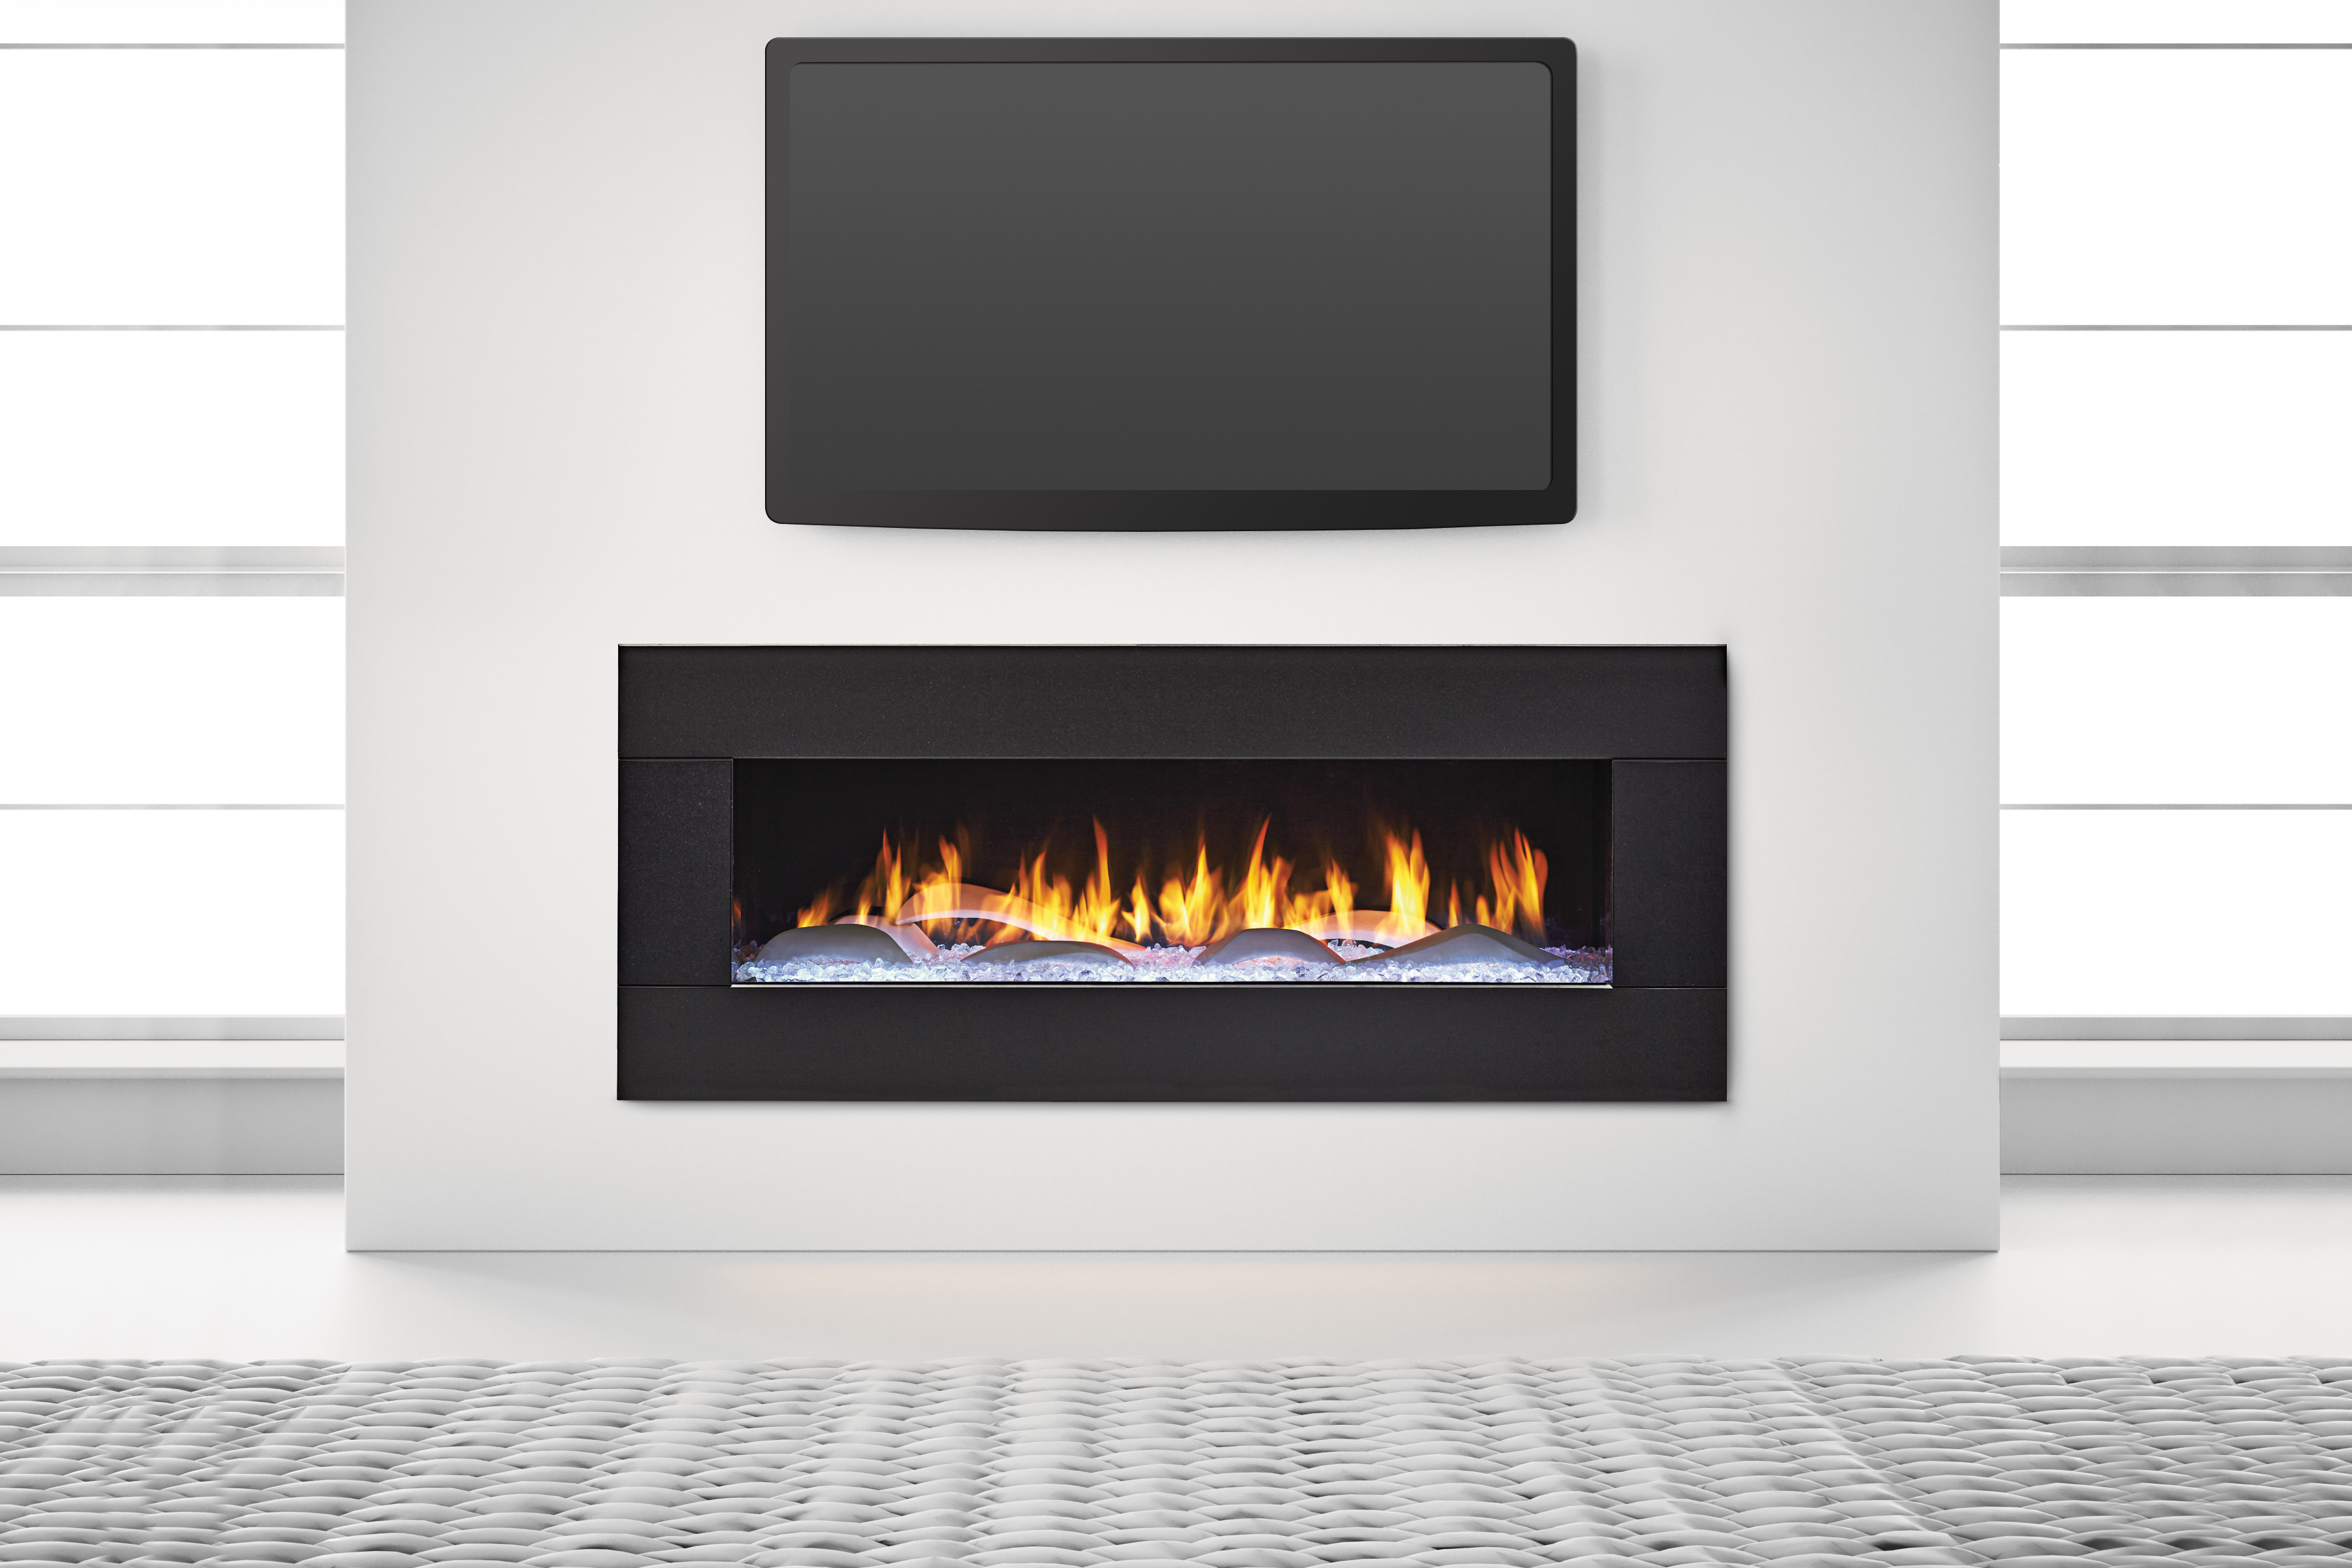 The Primo Direct Vent Gas Fireplace from Heat & Glo is one of the most luxurious fireplace with the innovative Powerflow Heat Management Technology.